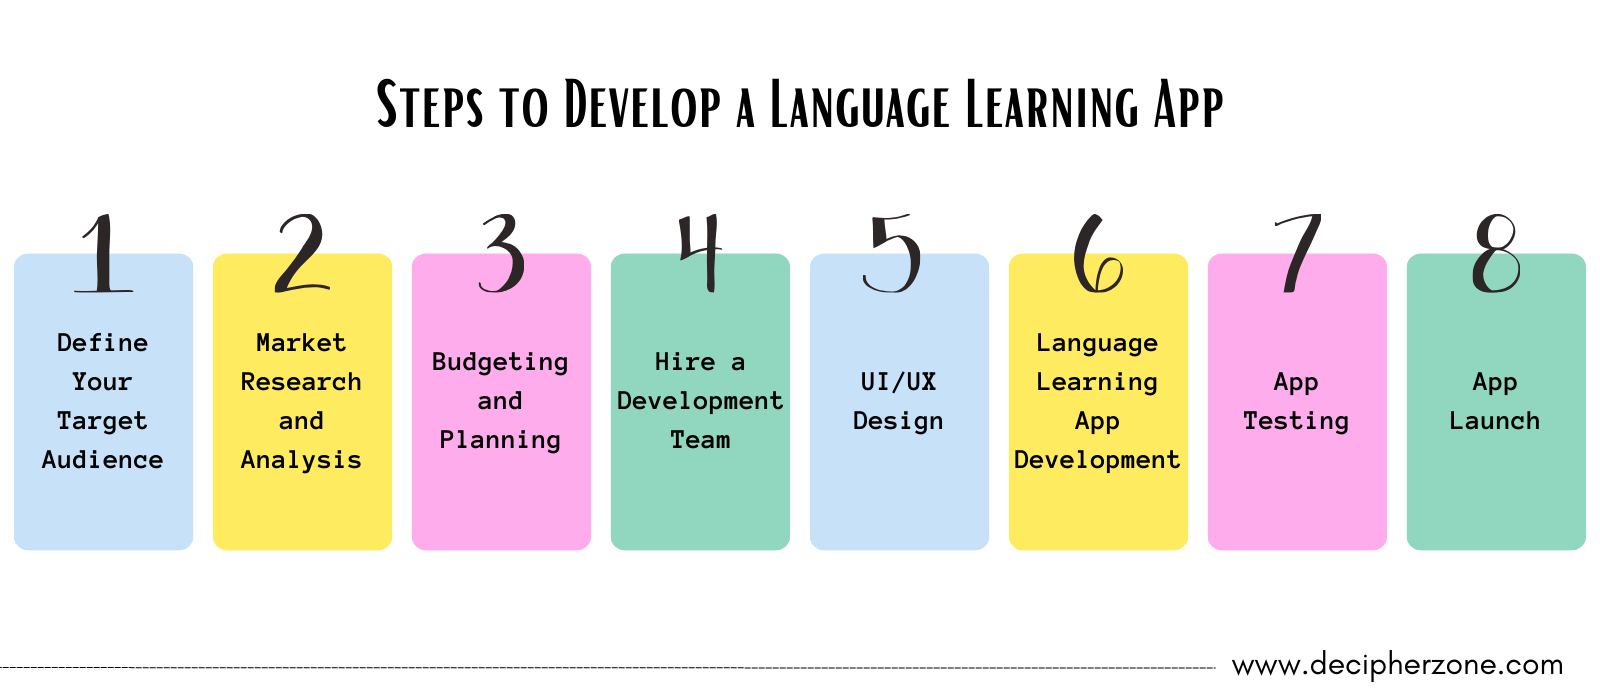 Steps to Develop a Language Learning App